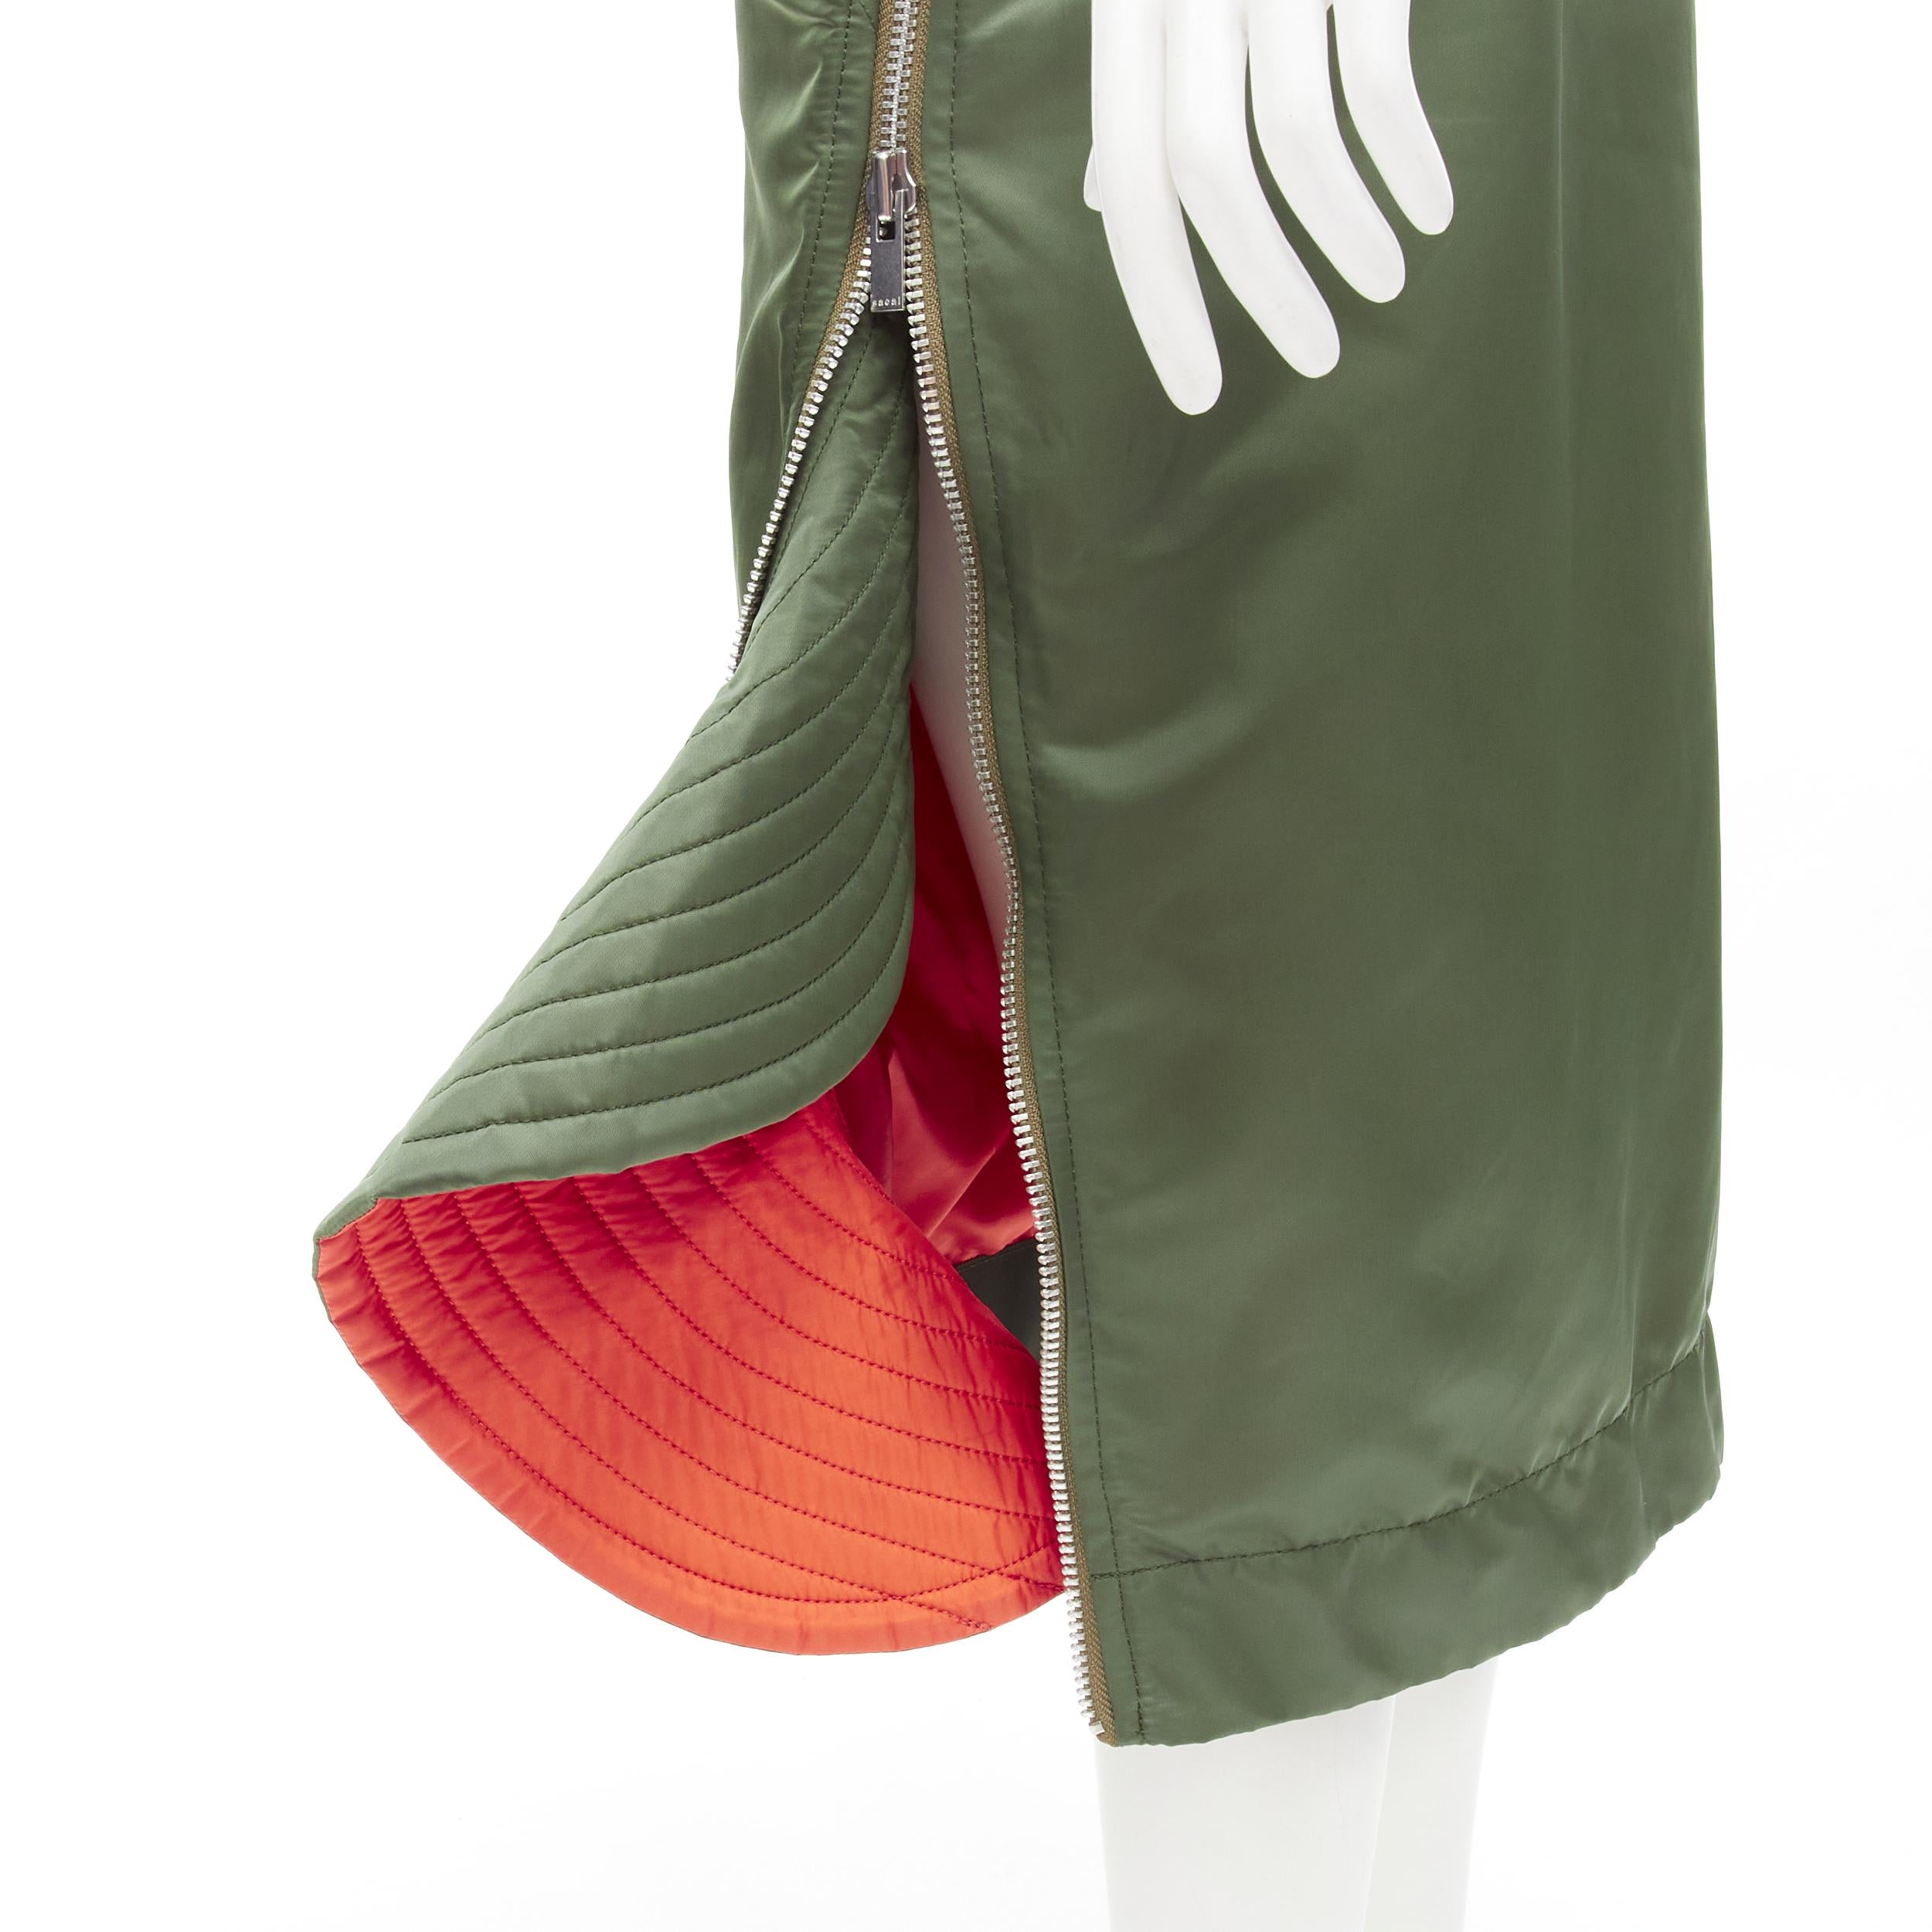 SACAI Chitose Abe green nylon deconstructed MA1 bomber flared skirt S
Brand: Sacai
Designer: Chitose Abe
Color: Green
Pattern: Solid
Closure: Stretchy
Extra Detail: Wide ribbed waist band with button tab details. Side zip closure. Ribbed flared